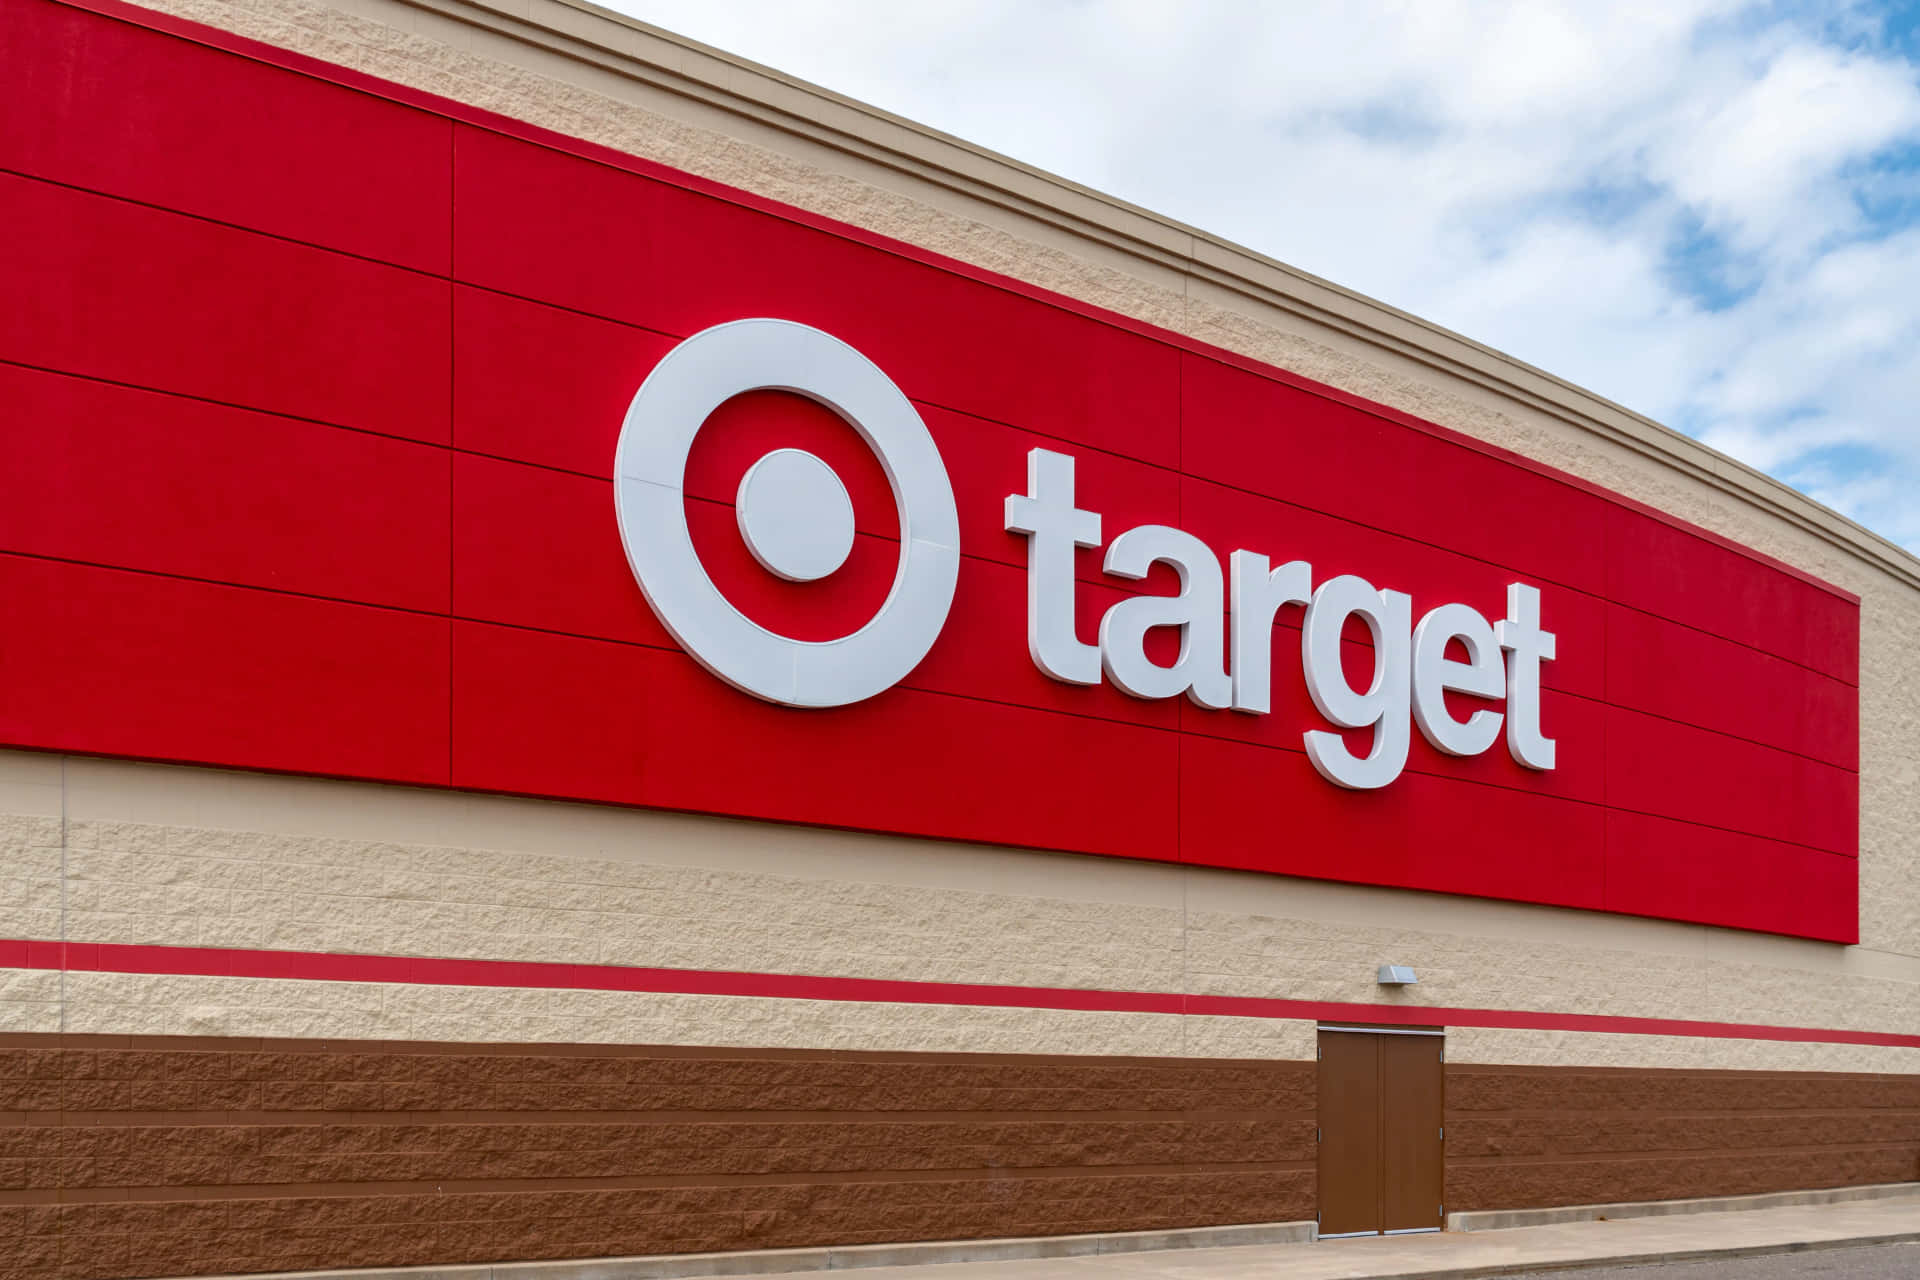 Separating with Style - Shop Target for More